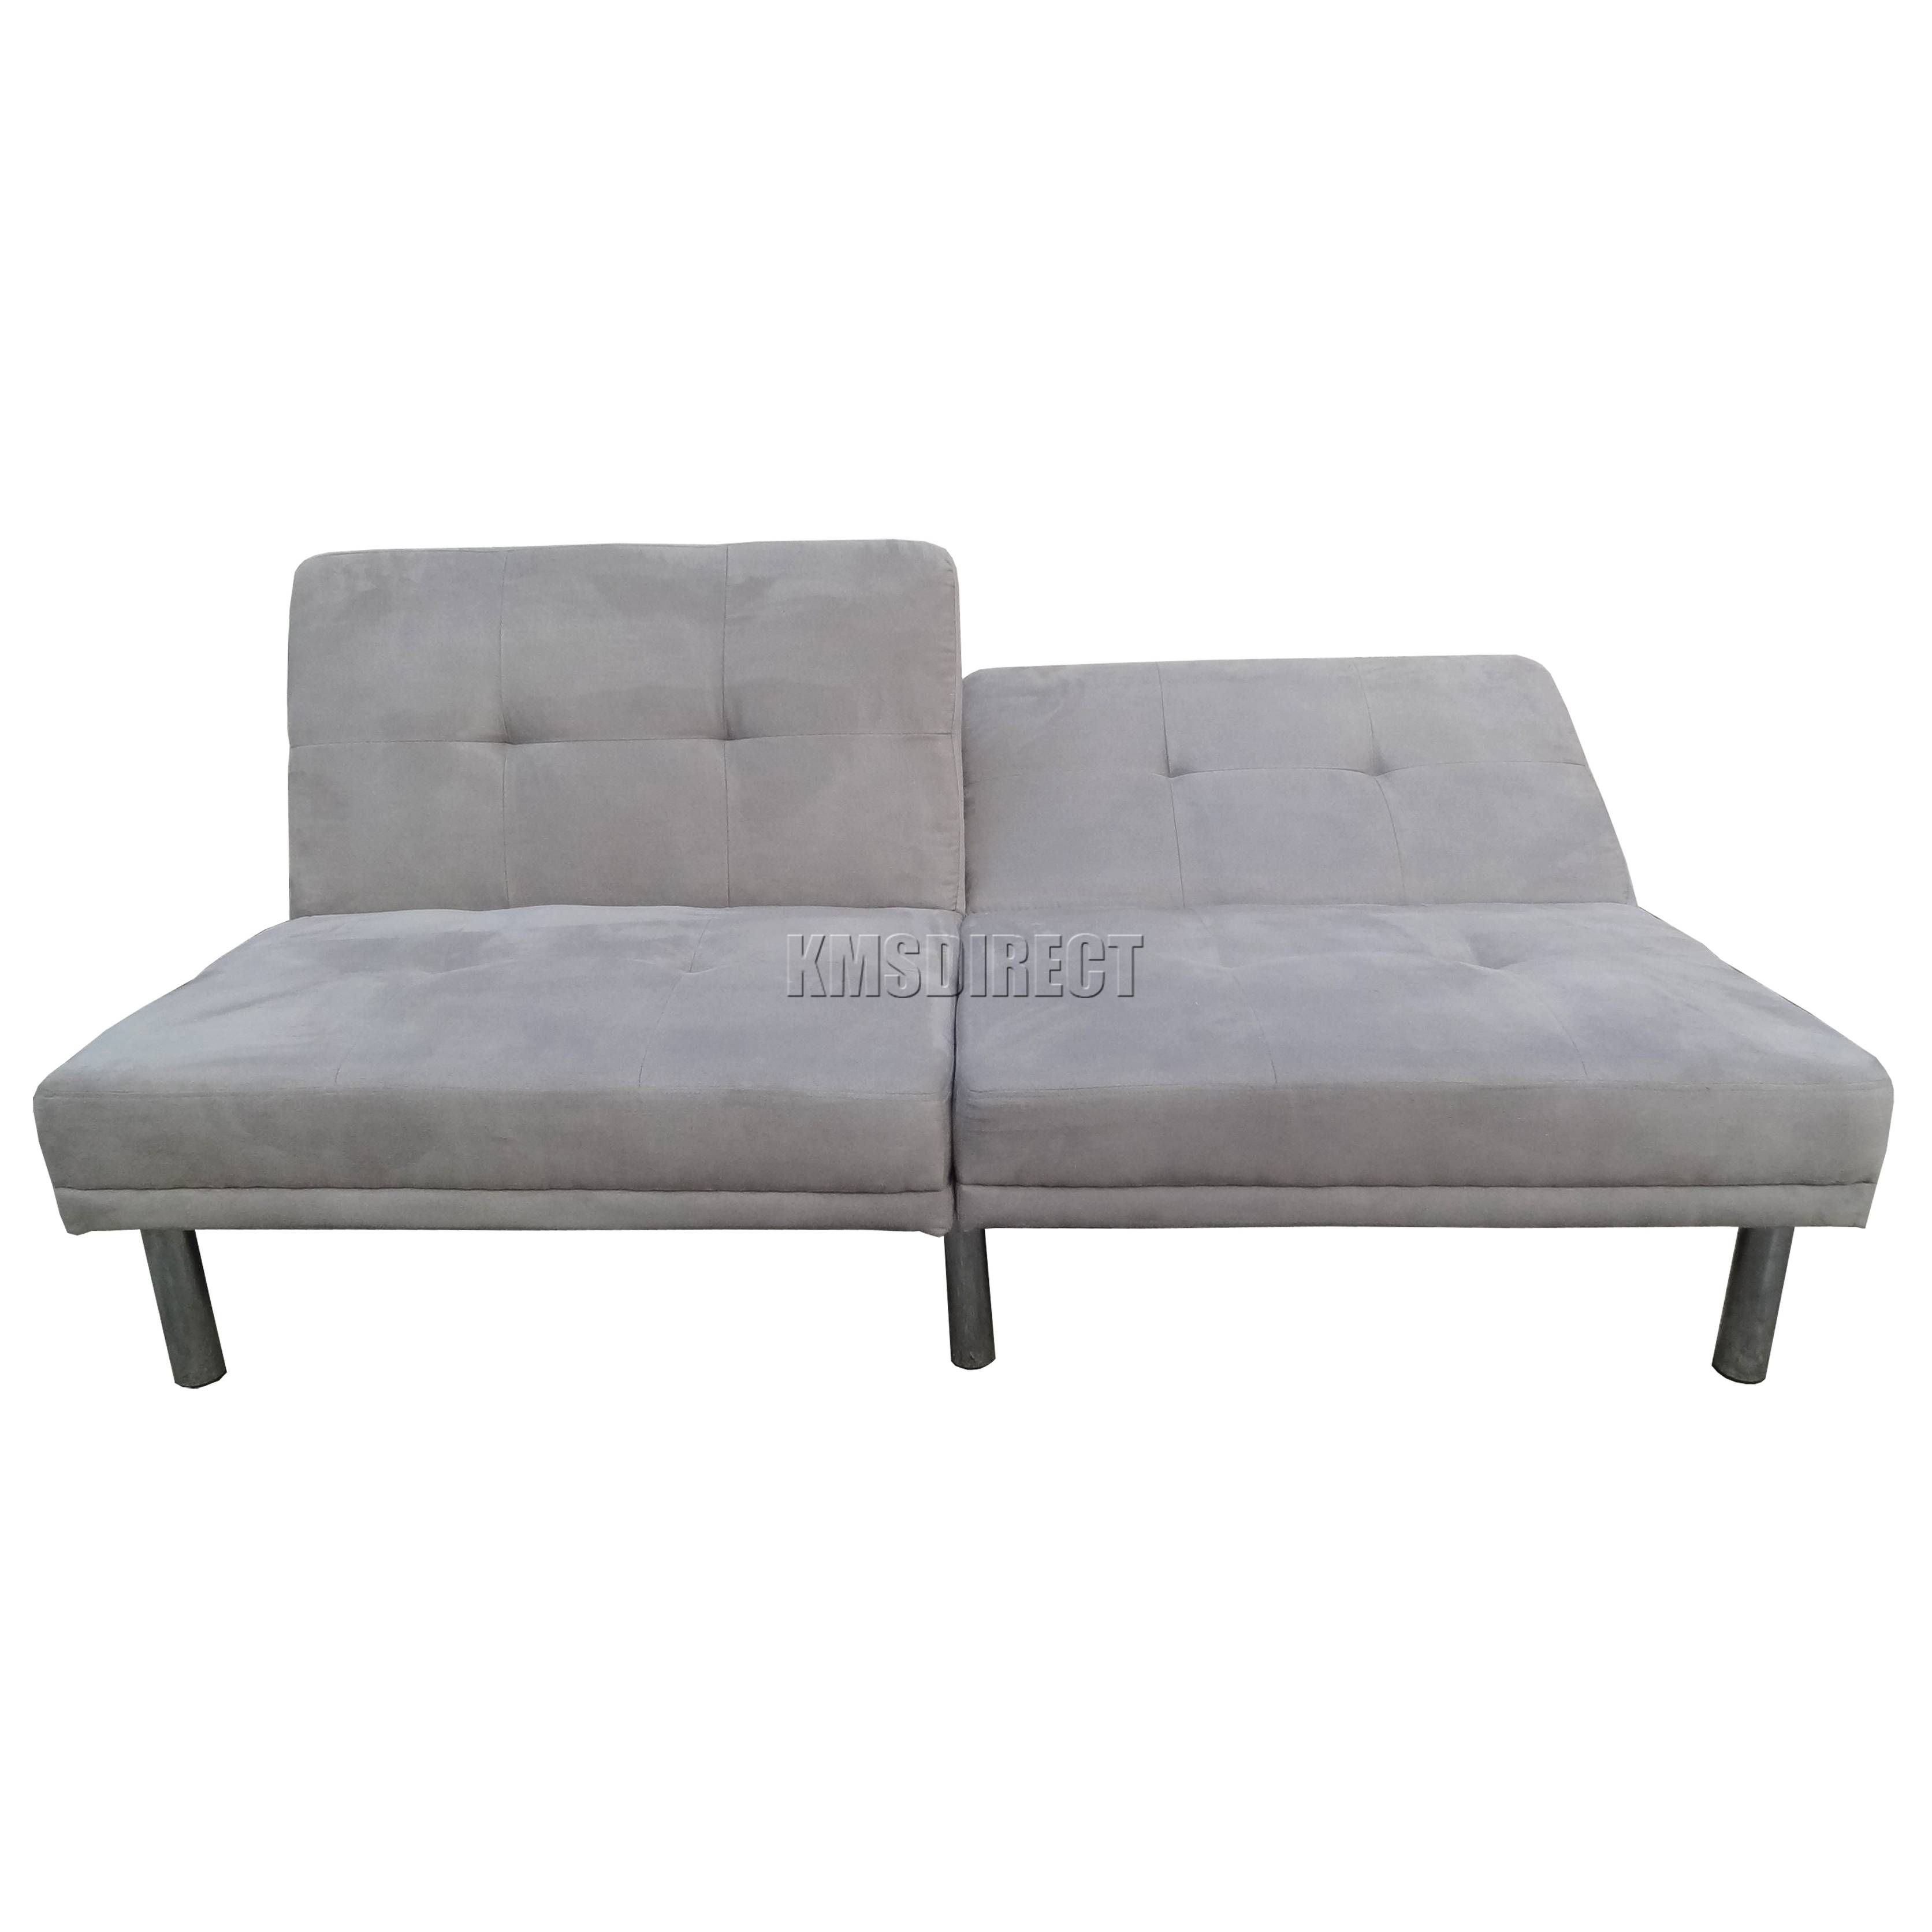 Foxhunter Fabric Faux Suede Sofa Bed Recliner 2 Seater Modern Pertaining To Faux Suede Sofa Bed (View 9 of 25)